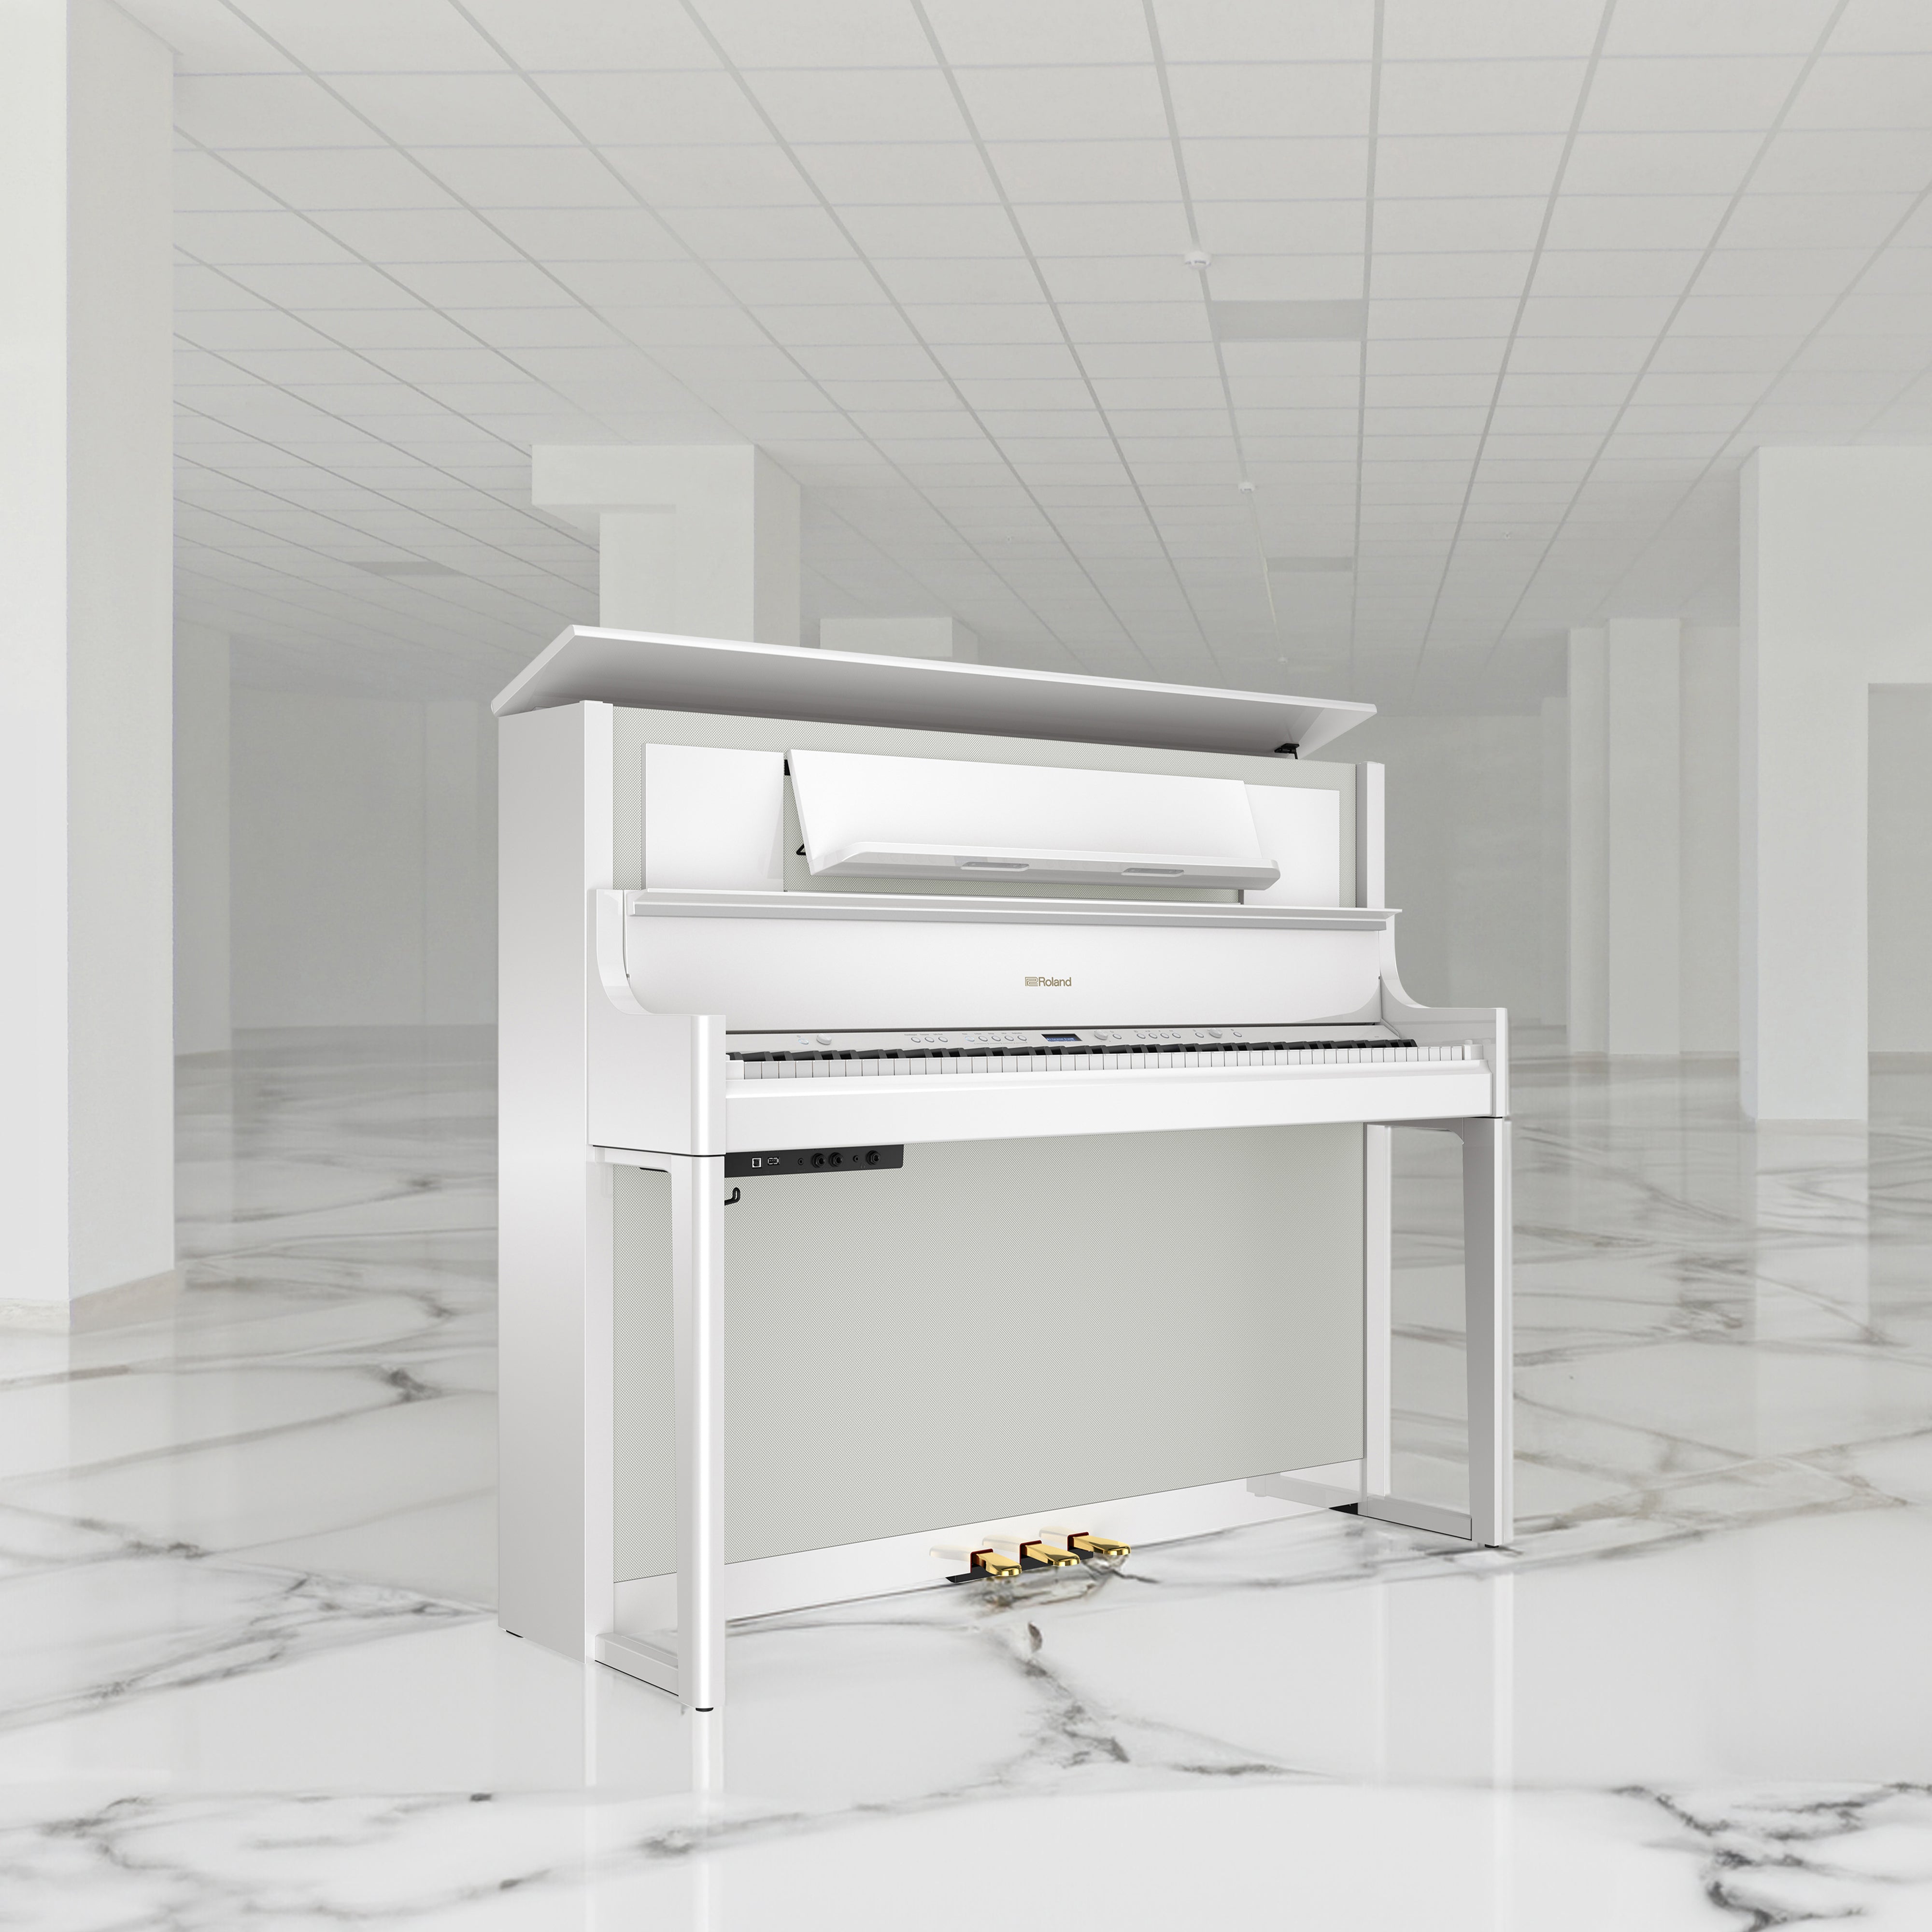 Roland LX708 Digital Piano - Polished White - in a large commercial hall